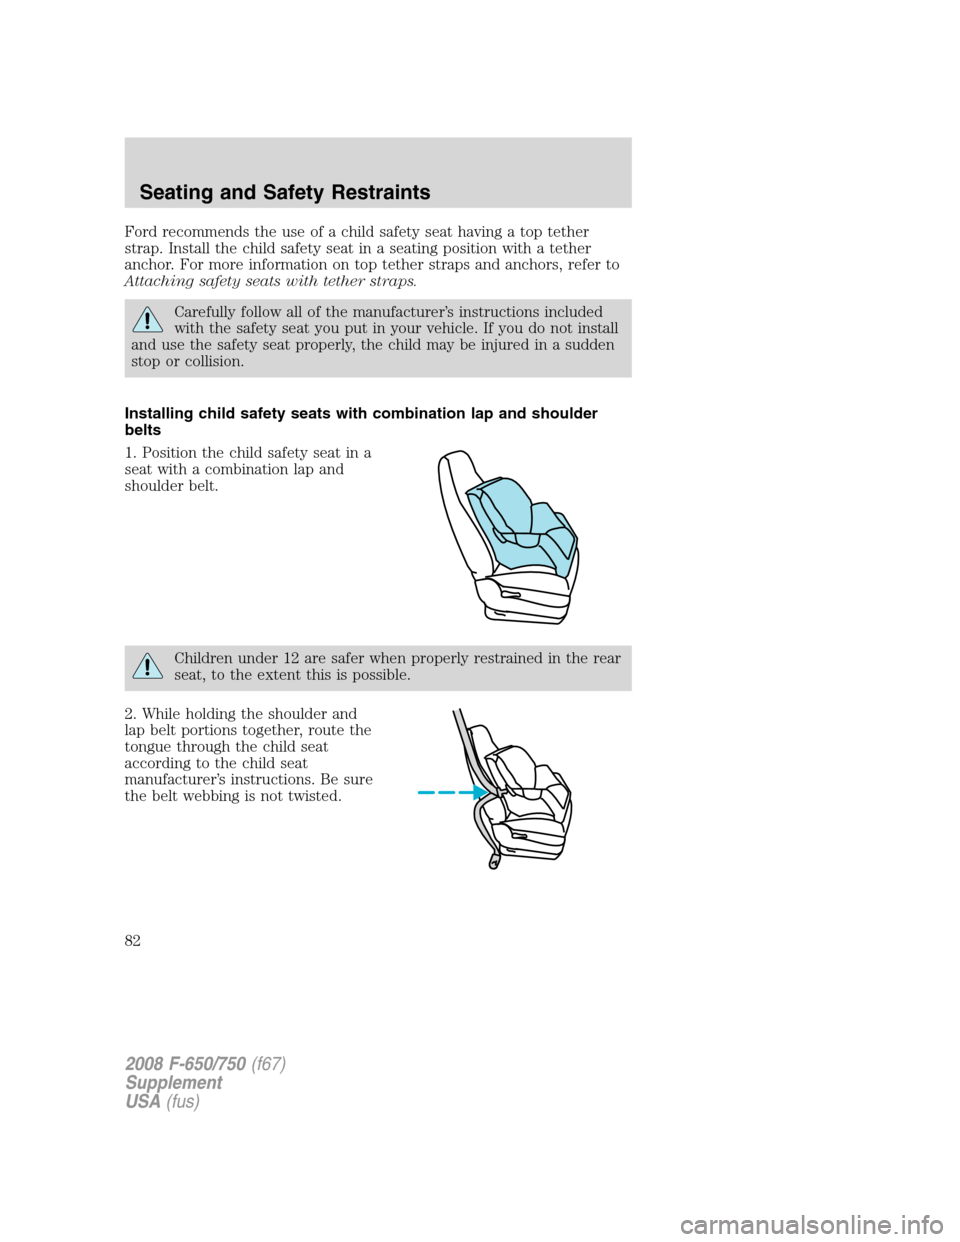 FORD F750 2008 11.G Owners Manual Ford recommends the use of a child safety seat having a top tether
strap. Install the child safety seat in a seating position with a tether
anchor. For more information on top tether straps and anchor